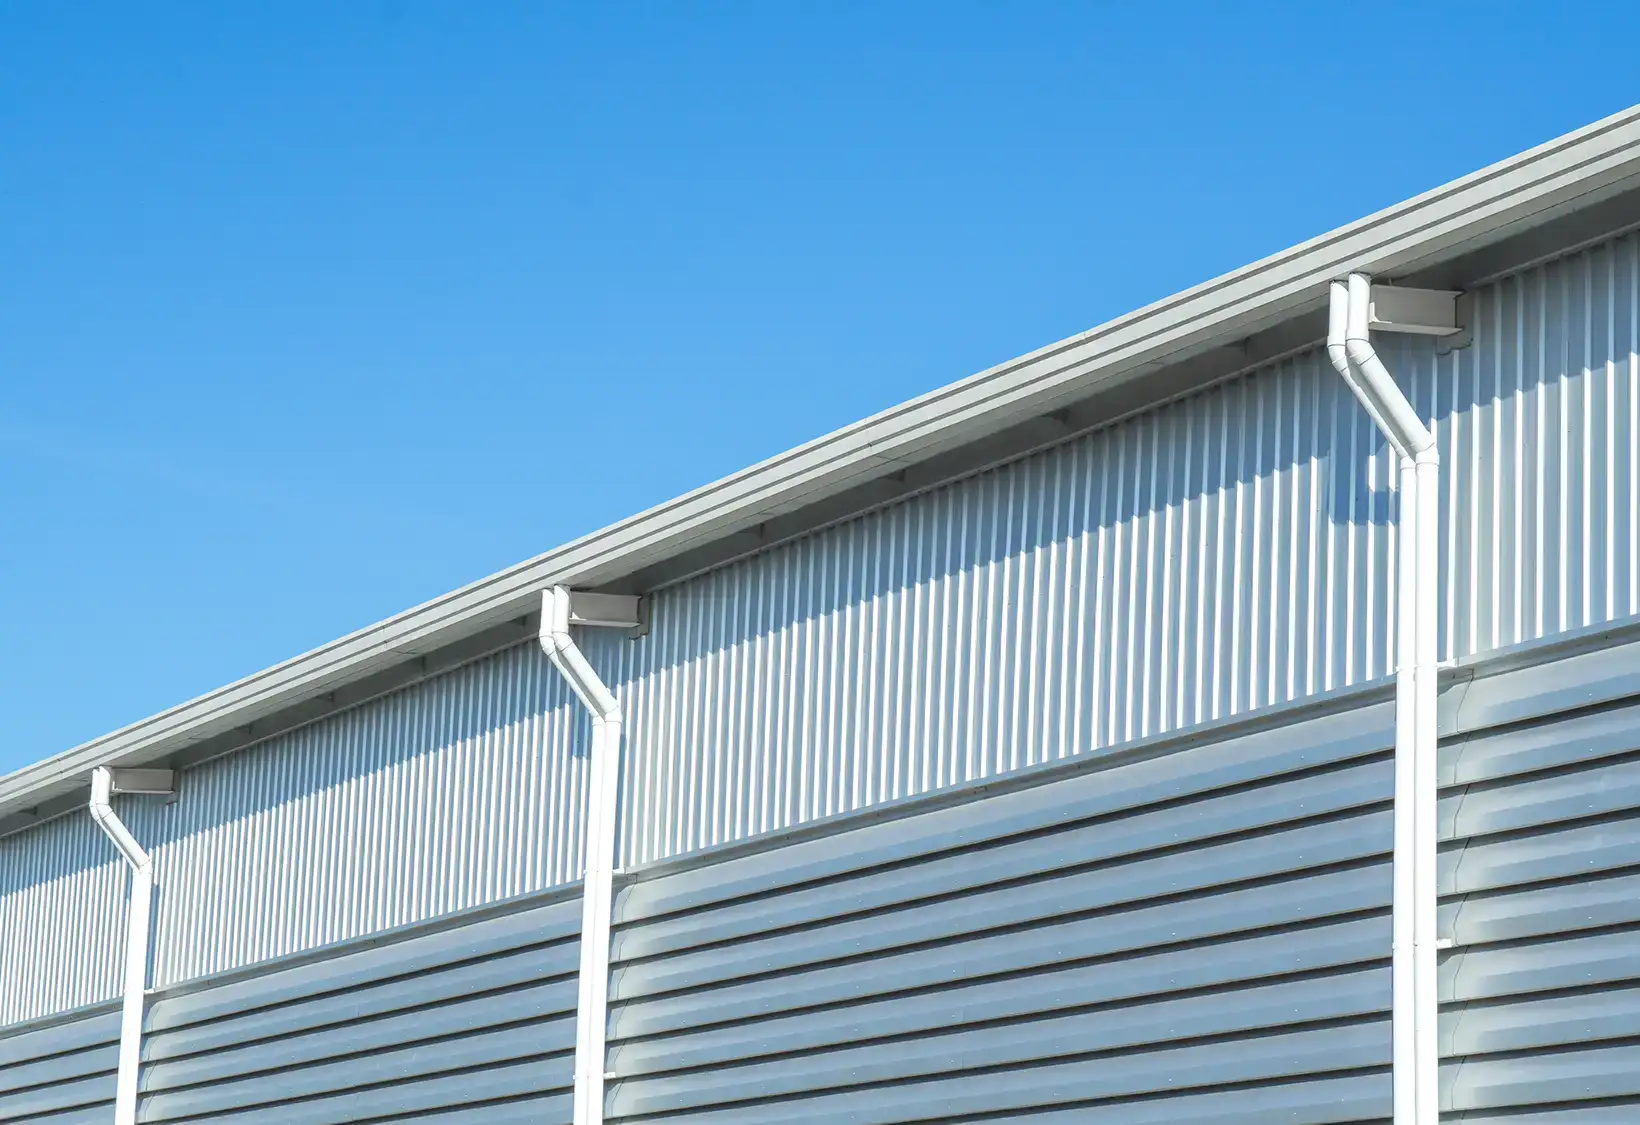 Commercial gutter system for large warehouse - Washington County, IL